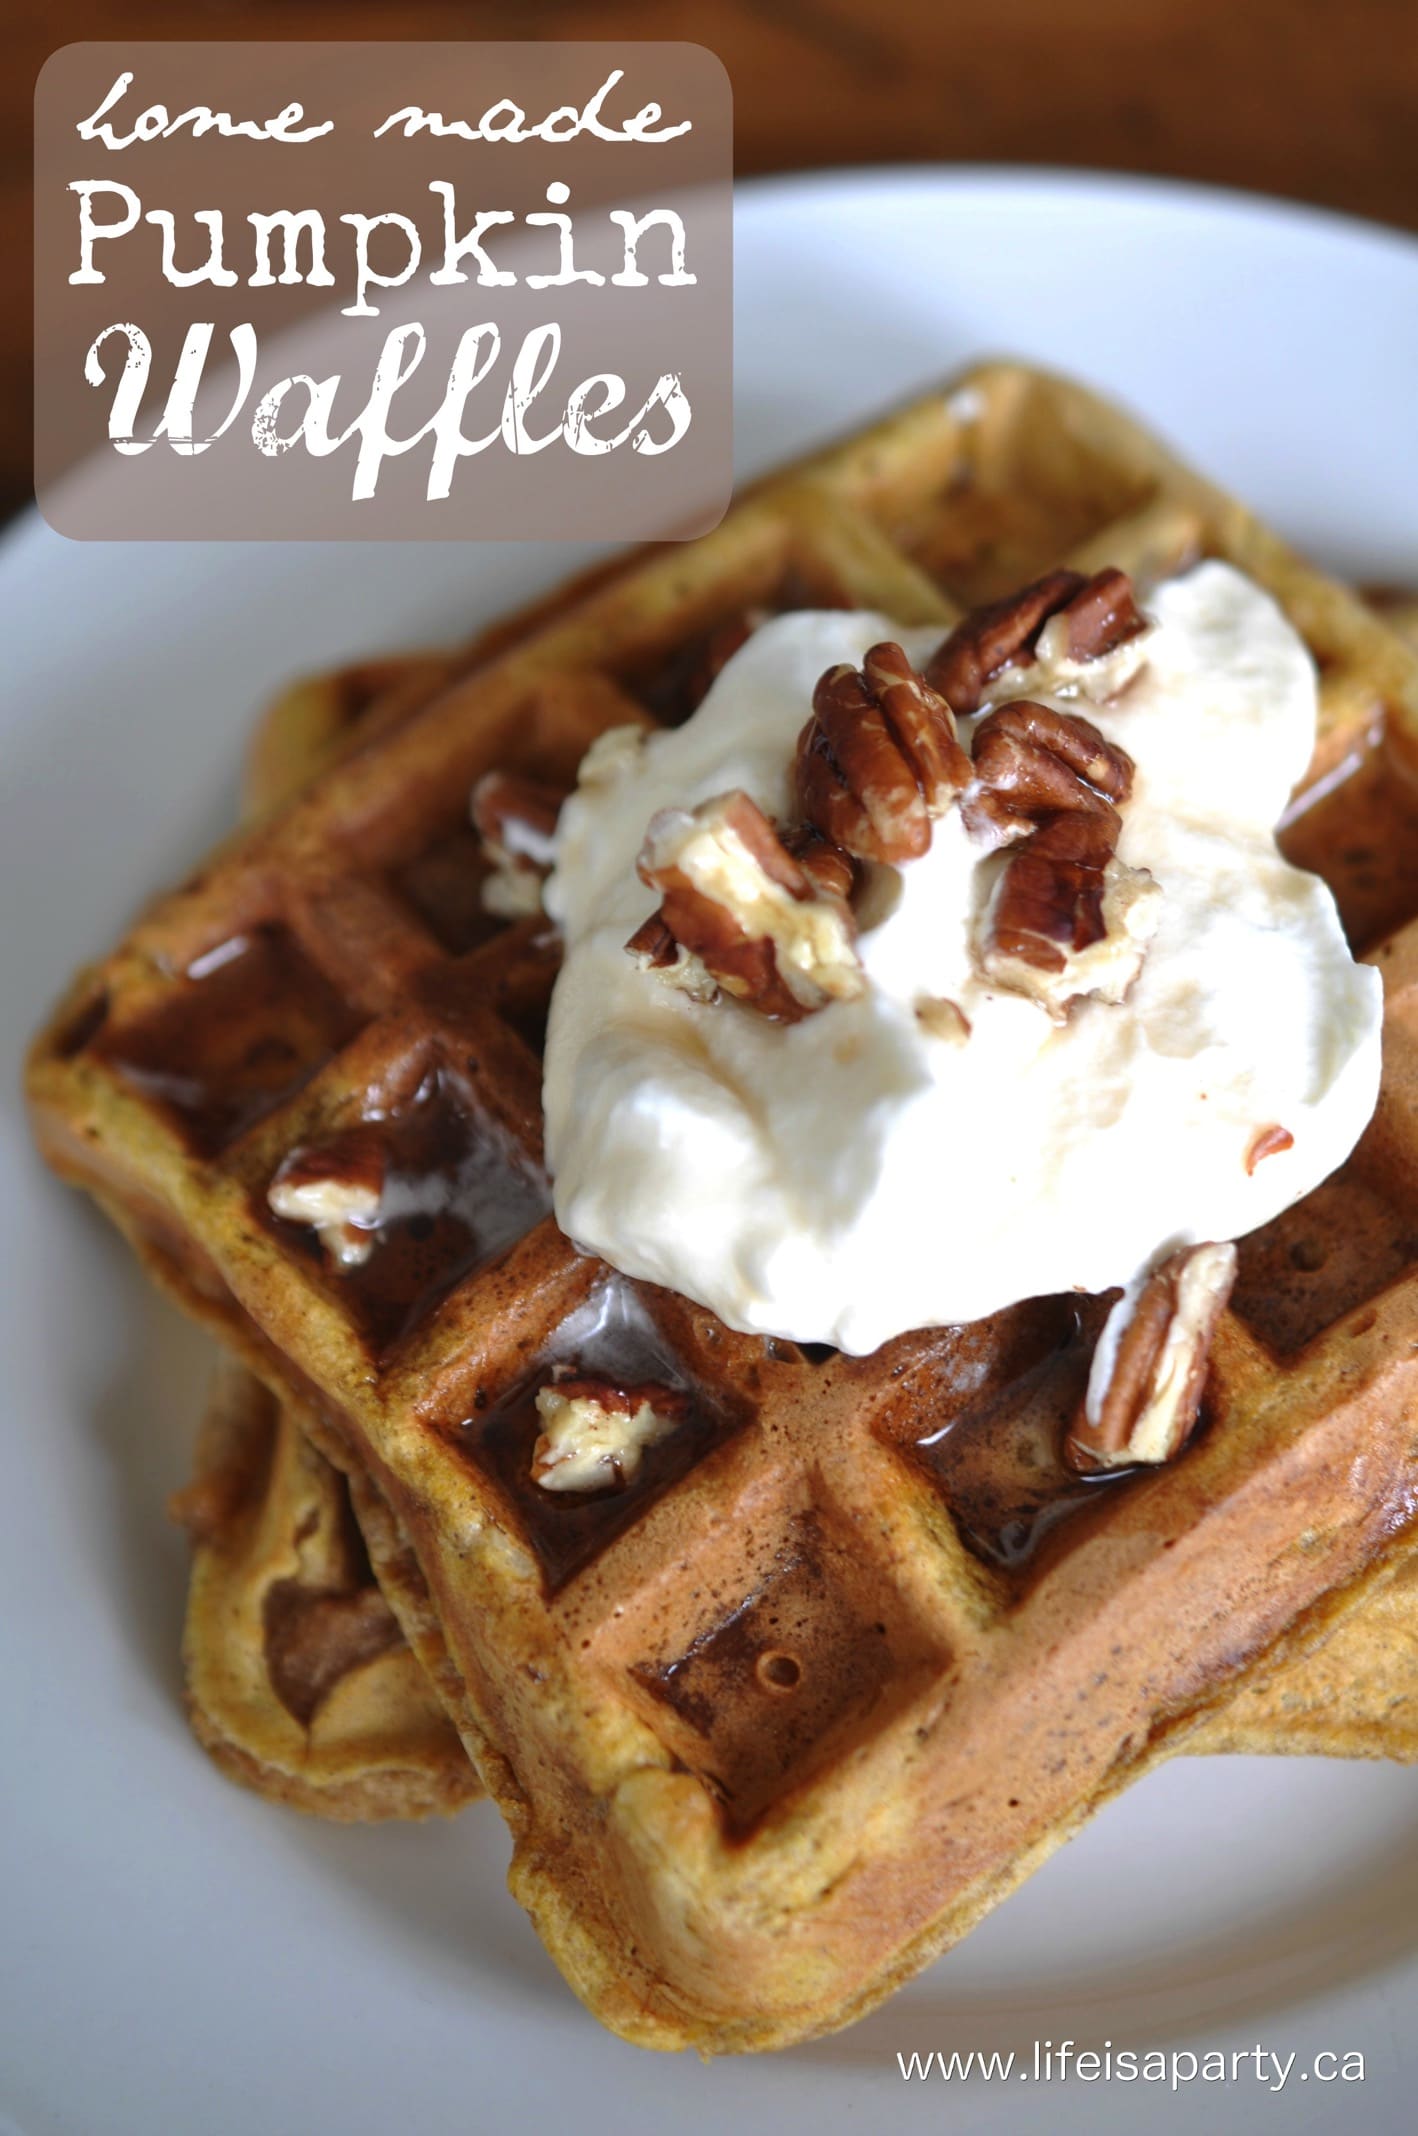 Homemade Pumpkin Waffles -easy recipe for pumpkin waffles, perfect morning treat, and easy to freeze extras for a quick weekday breakfast later.